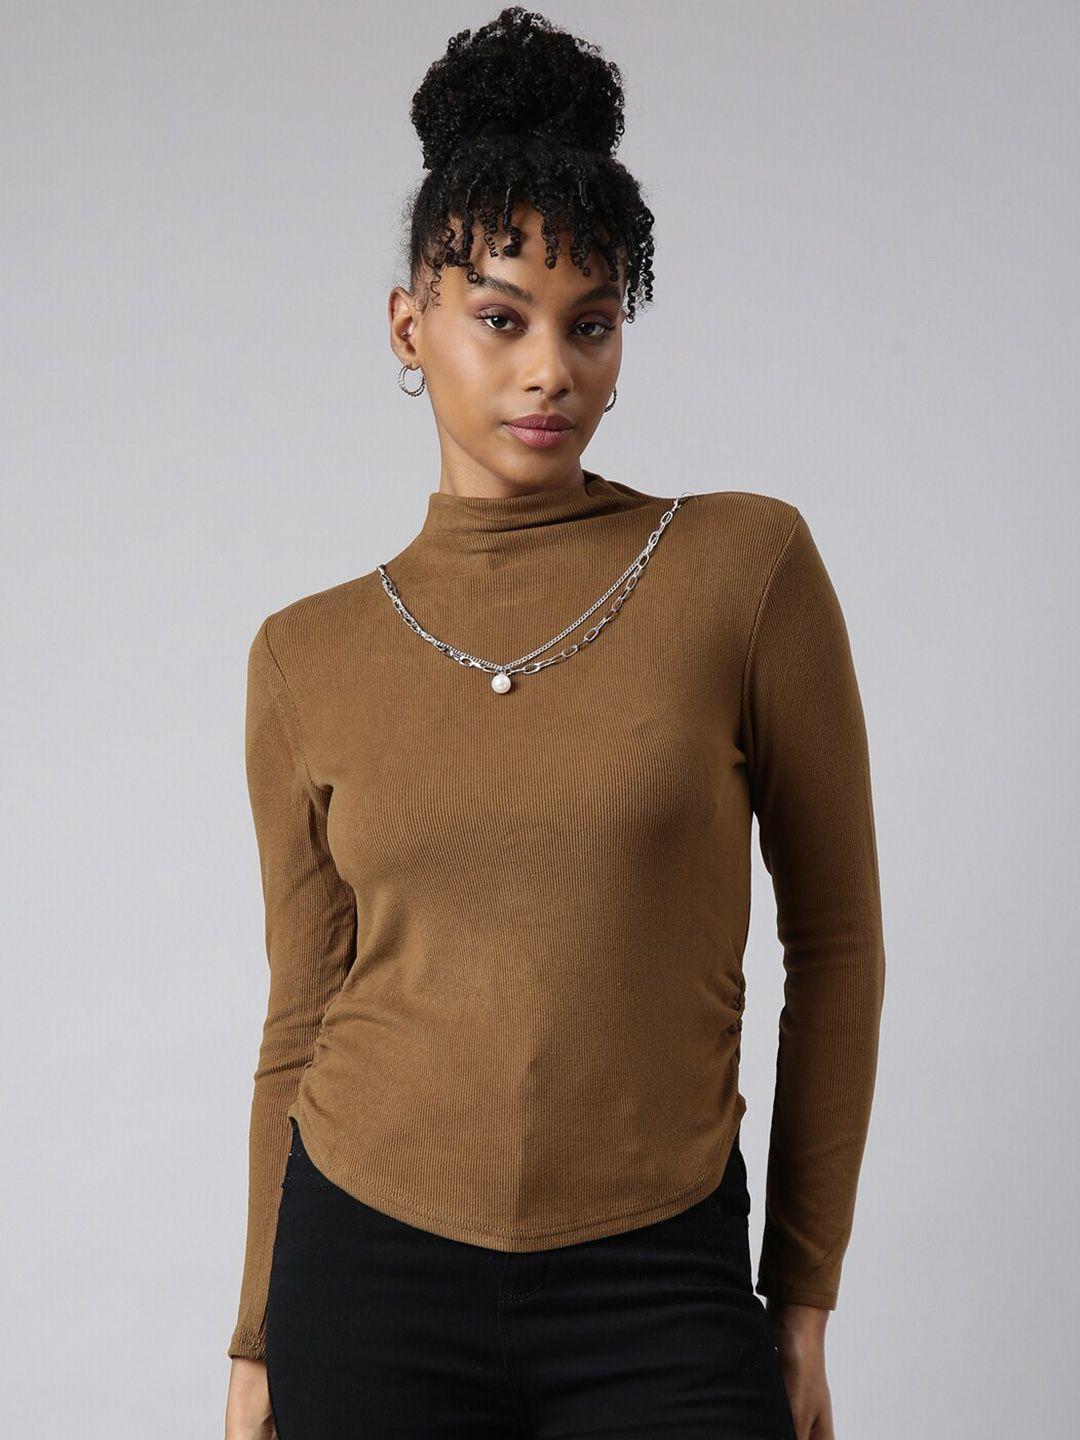 showoff-high-neck-velvet-top-comes-with-chain